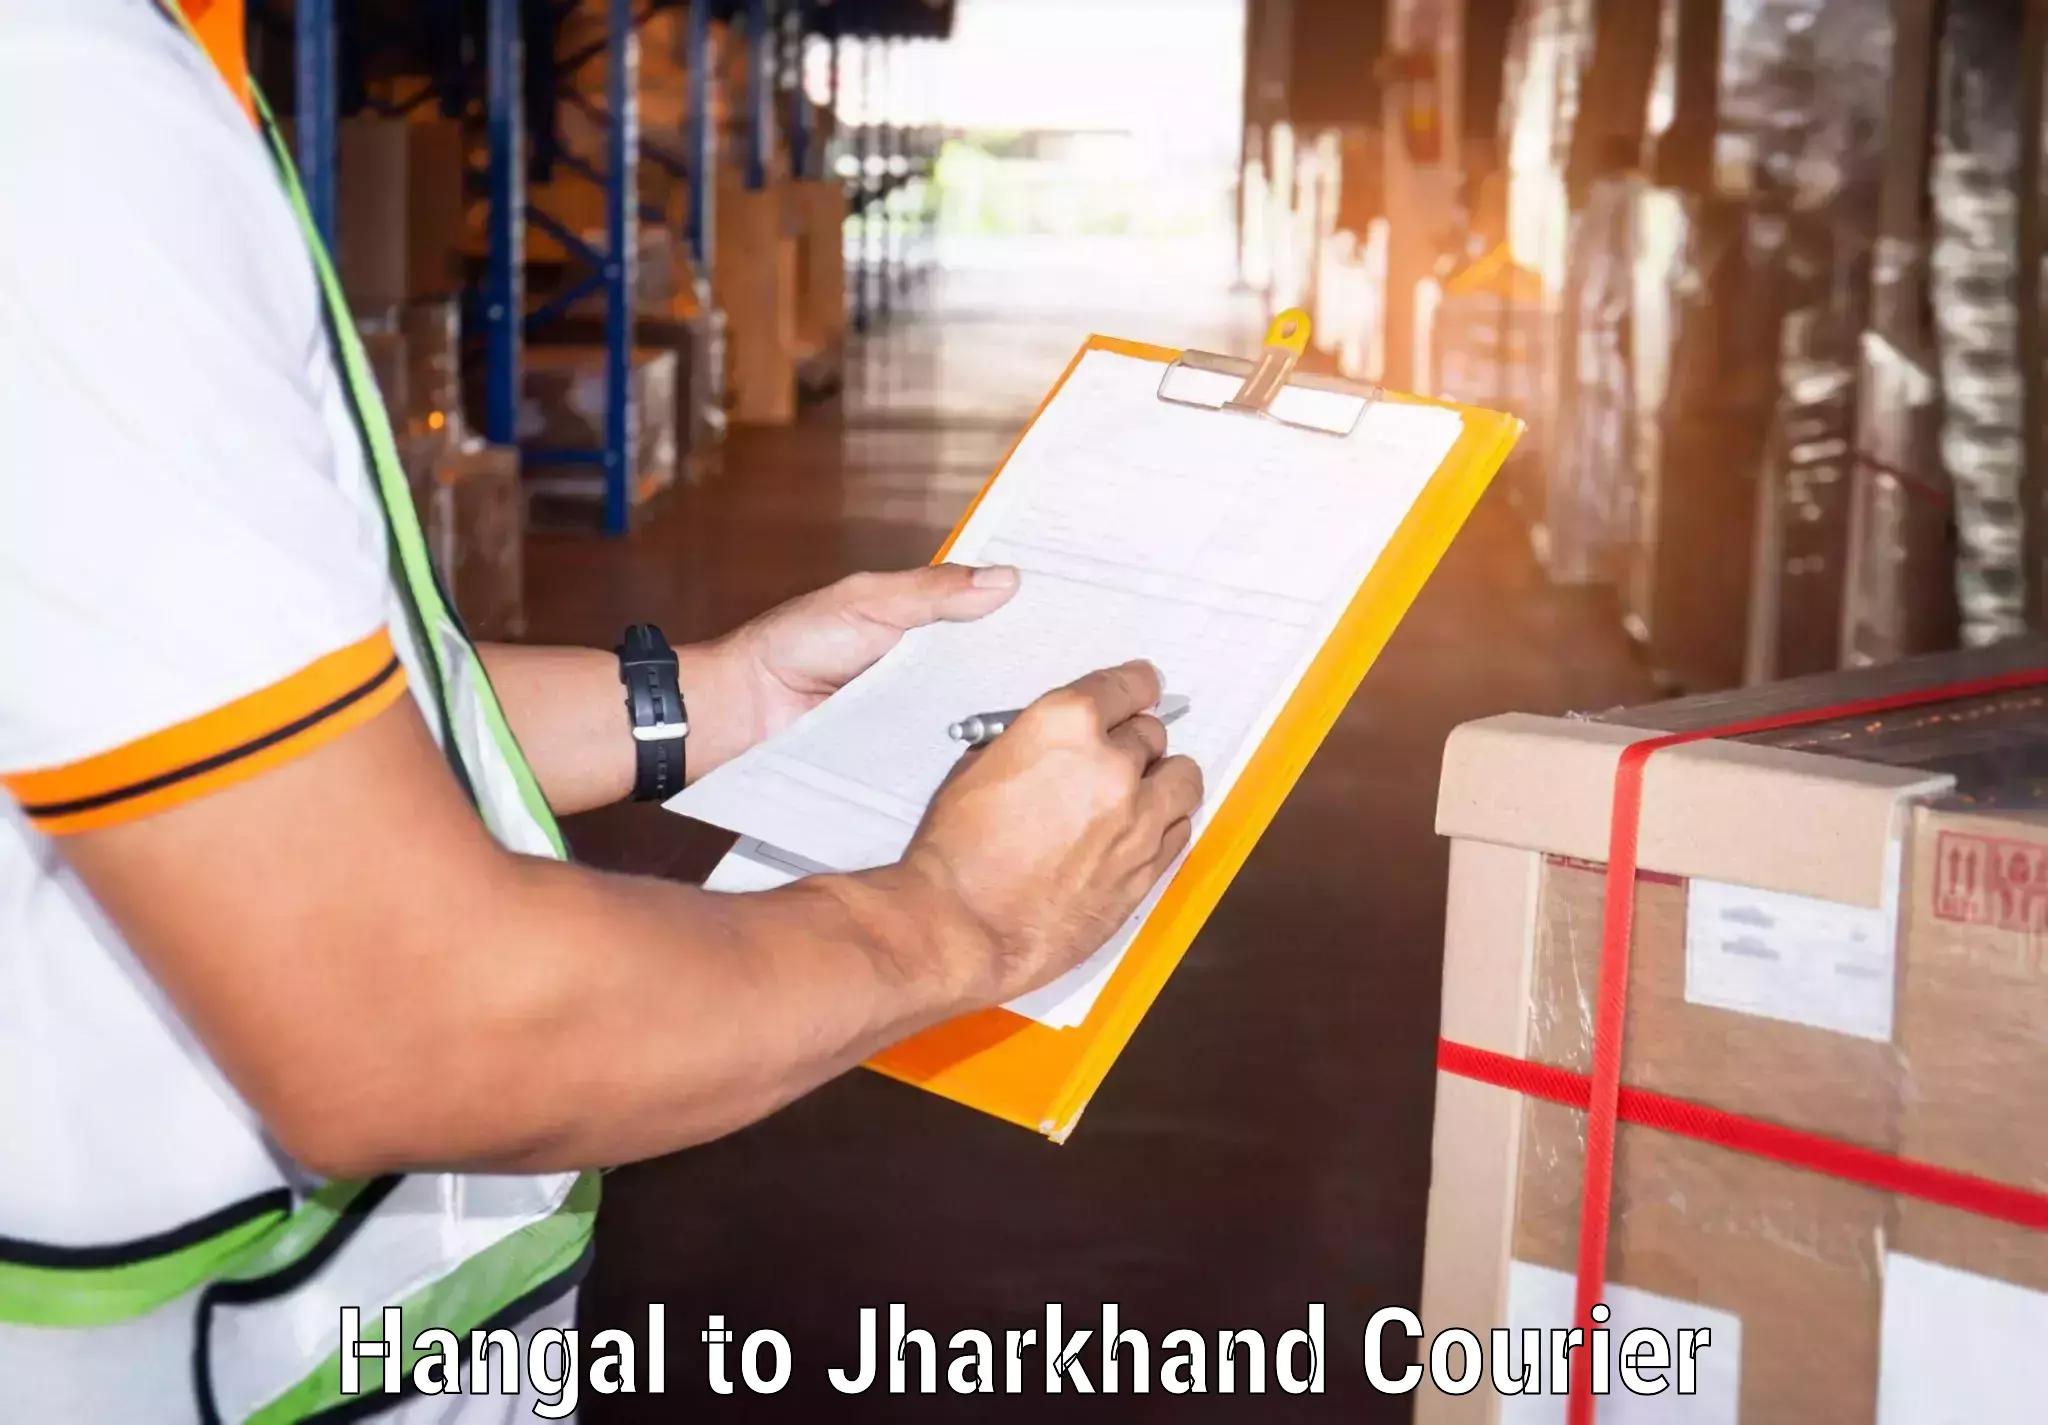 Affordable parcel service in Hangal to Bokaro Steel City